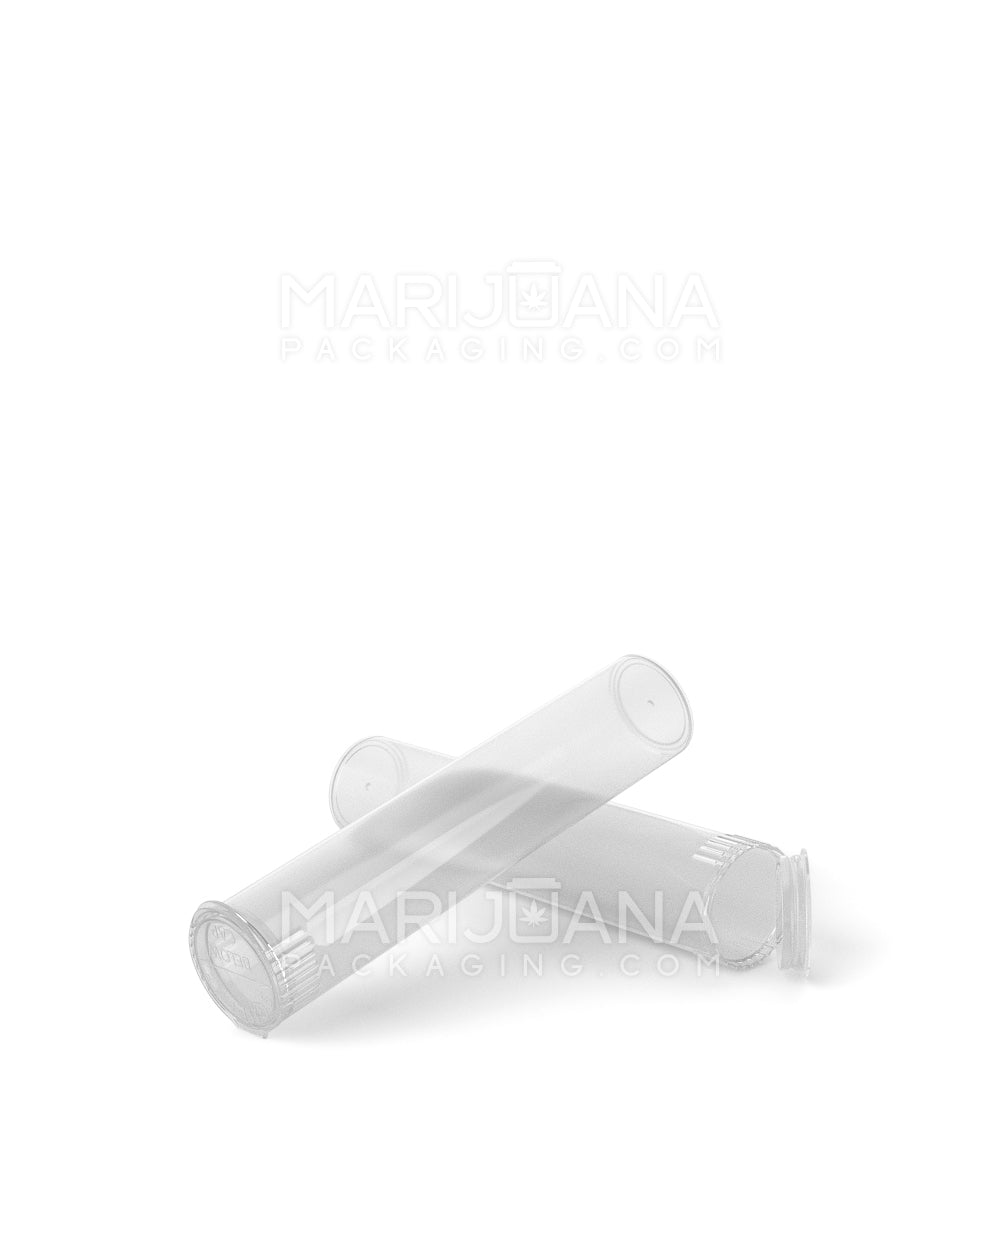 90mm Clear White Glass Pre Roll Tube